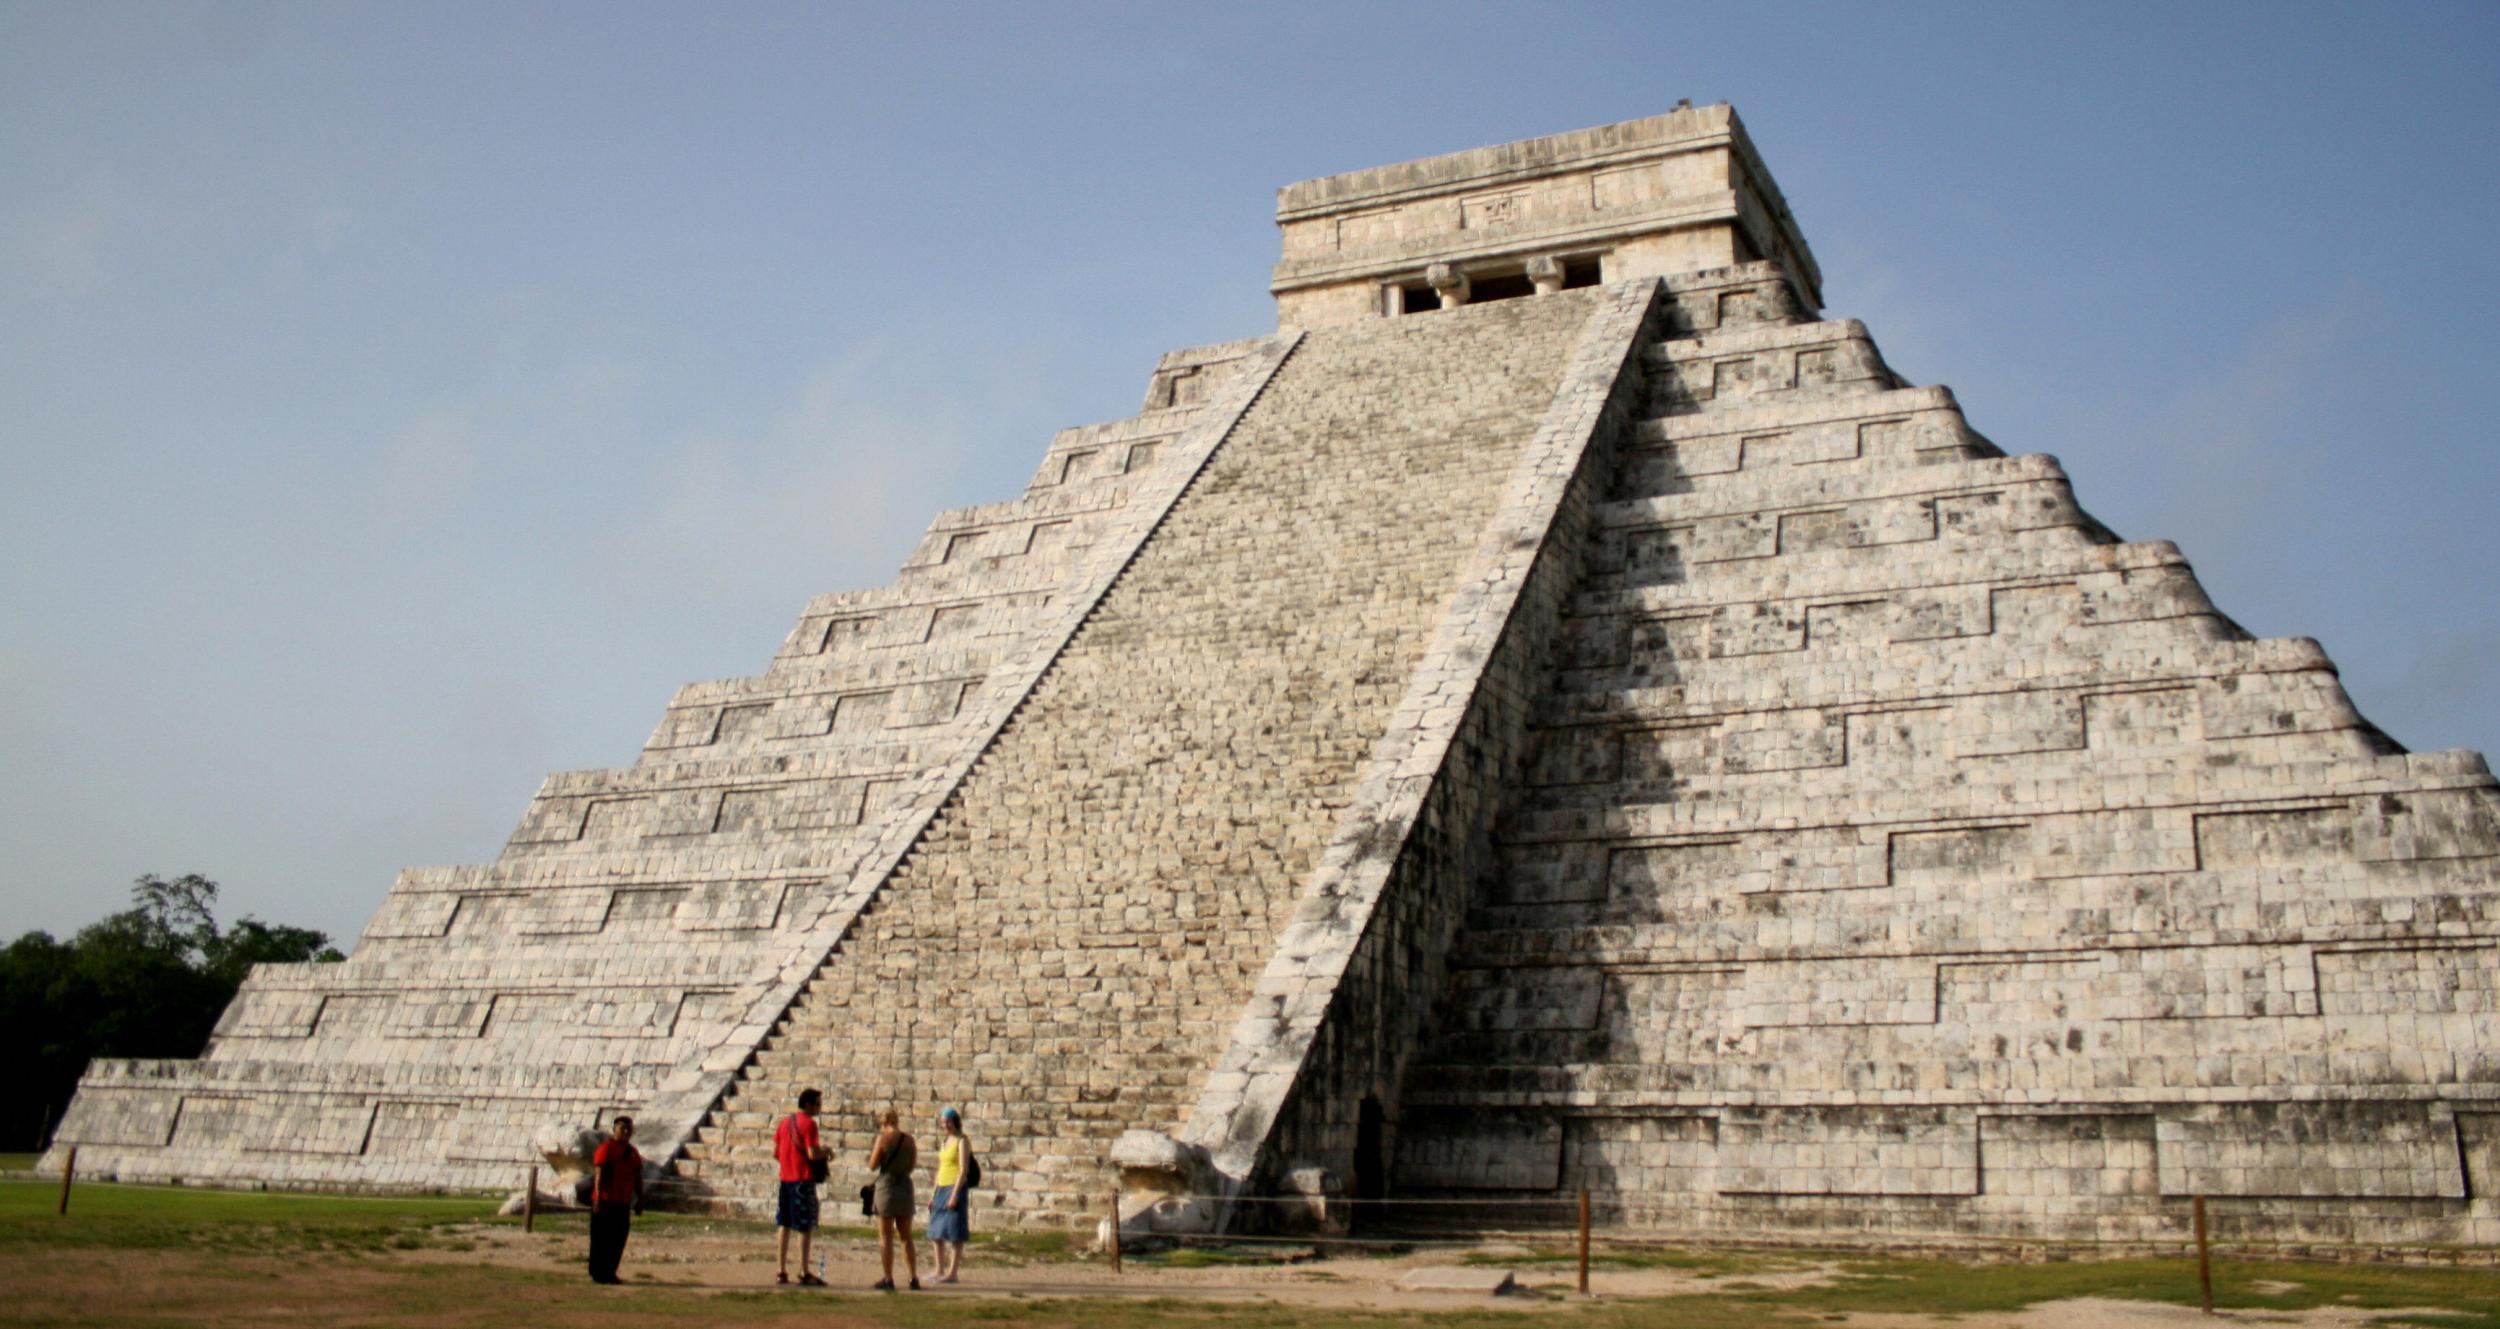 The Kukulcan Temple in Chichen Itza is one of the most well-known Mayan relics